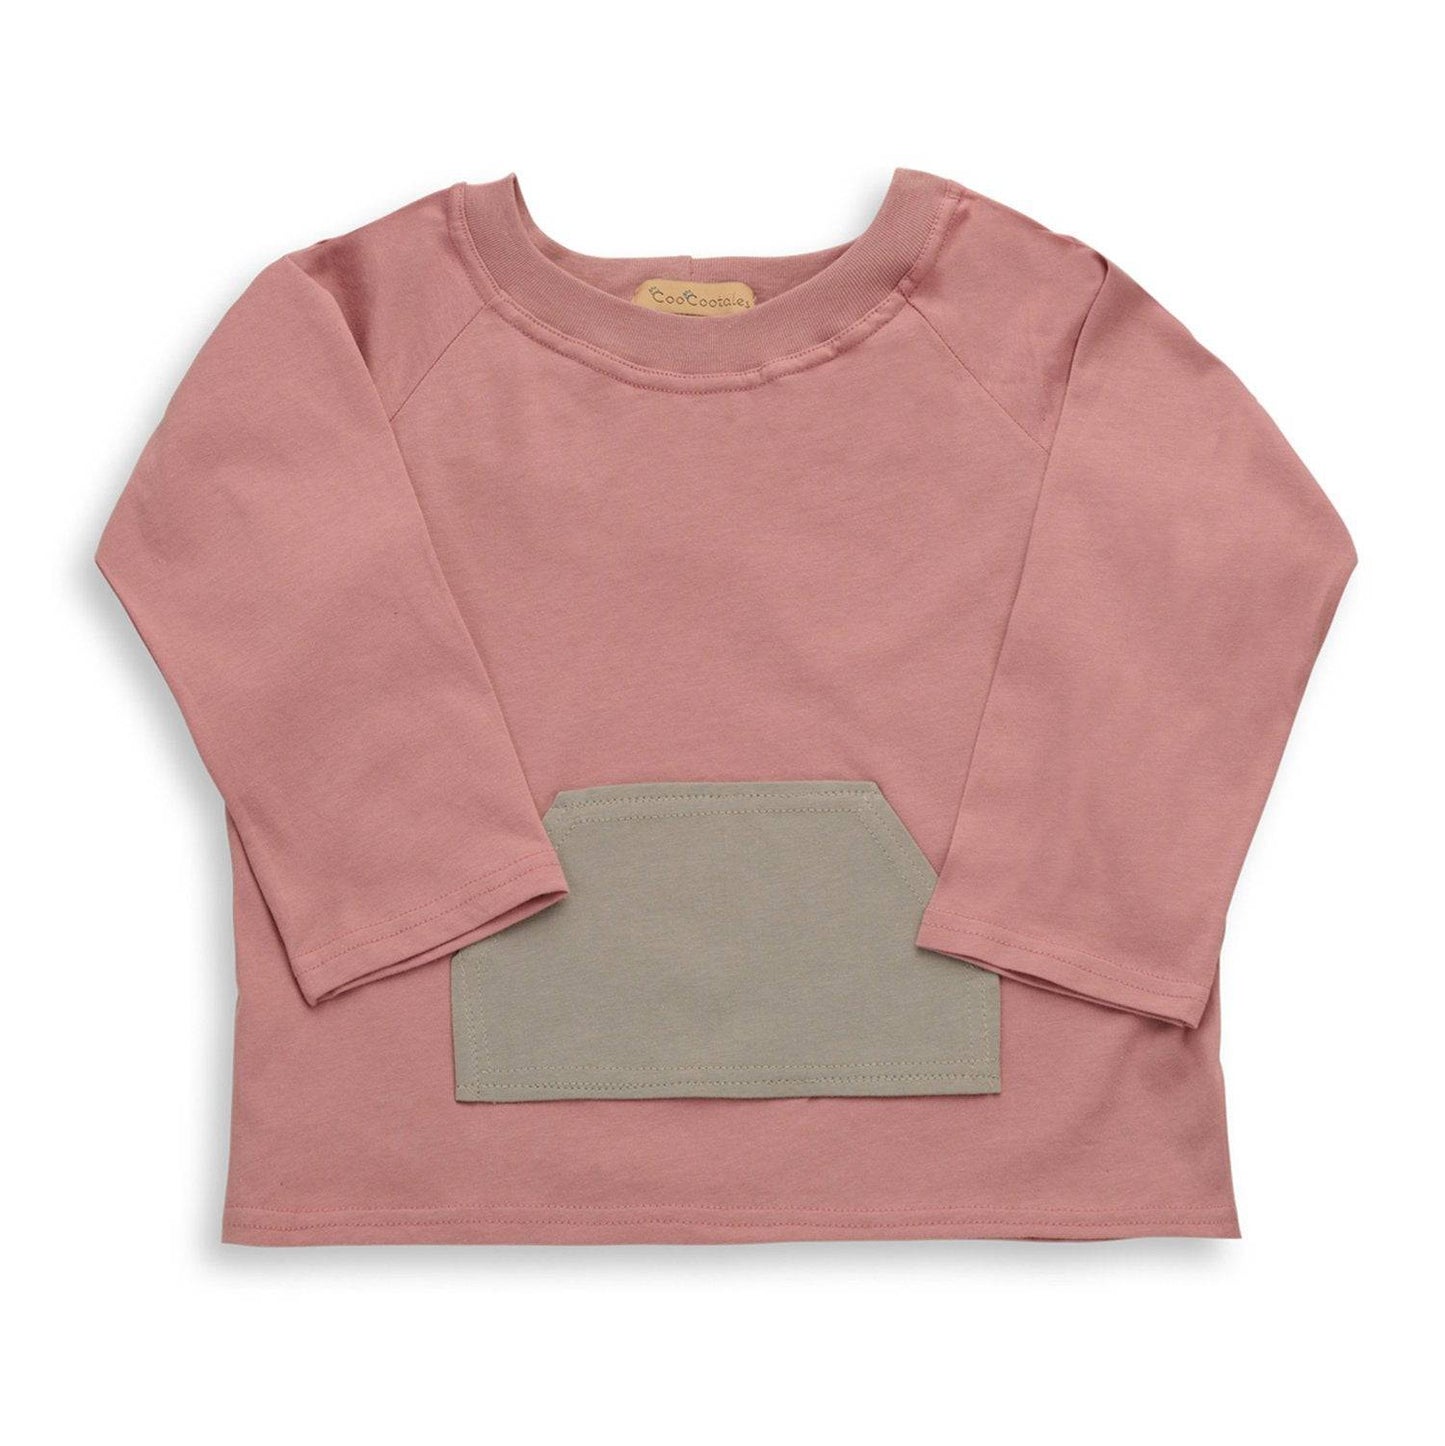 The Boat T-Shirts (boys - pink) - CooCootales